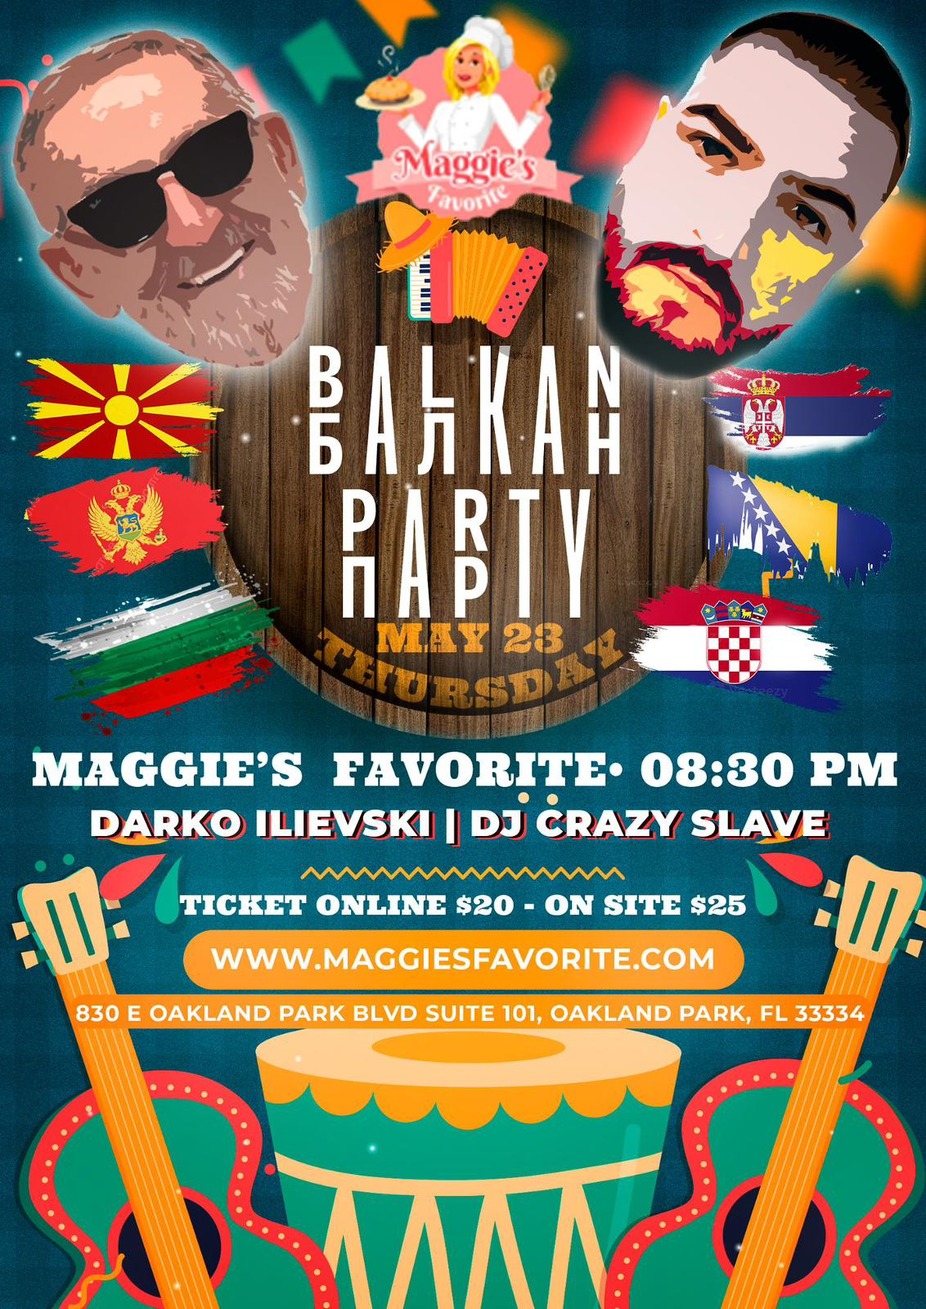 Balkan party event photo